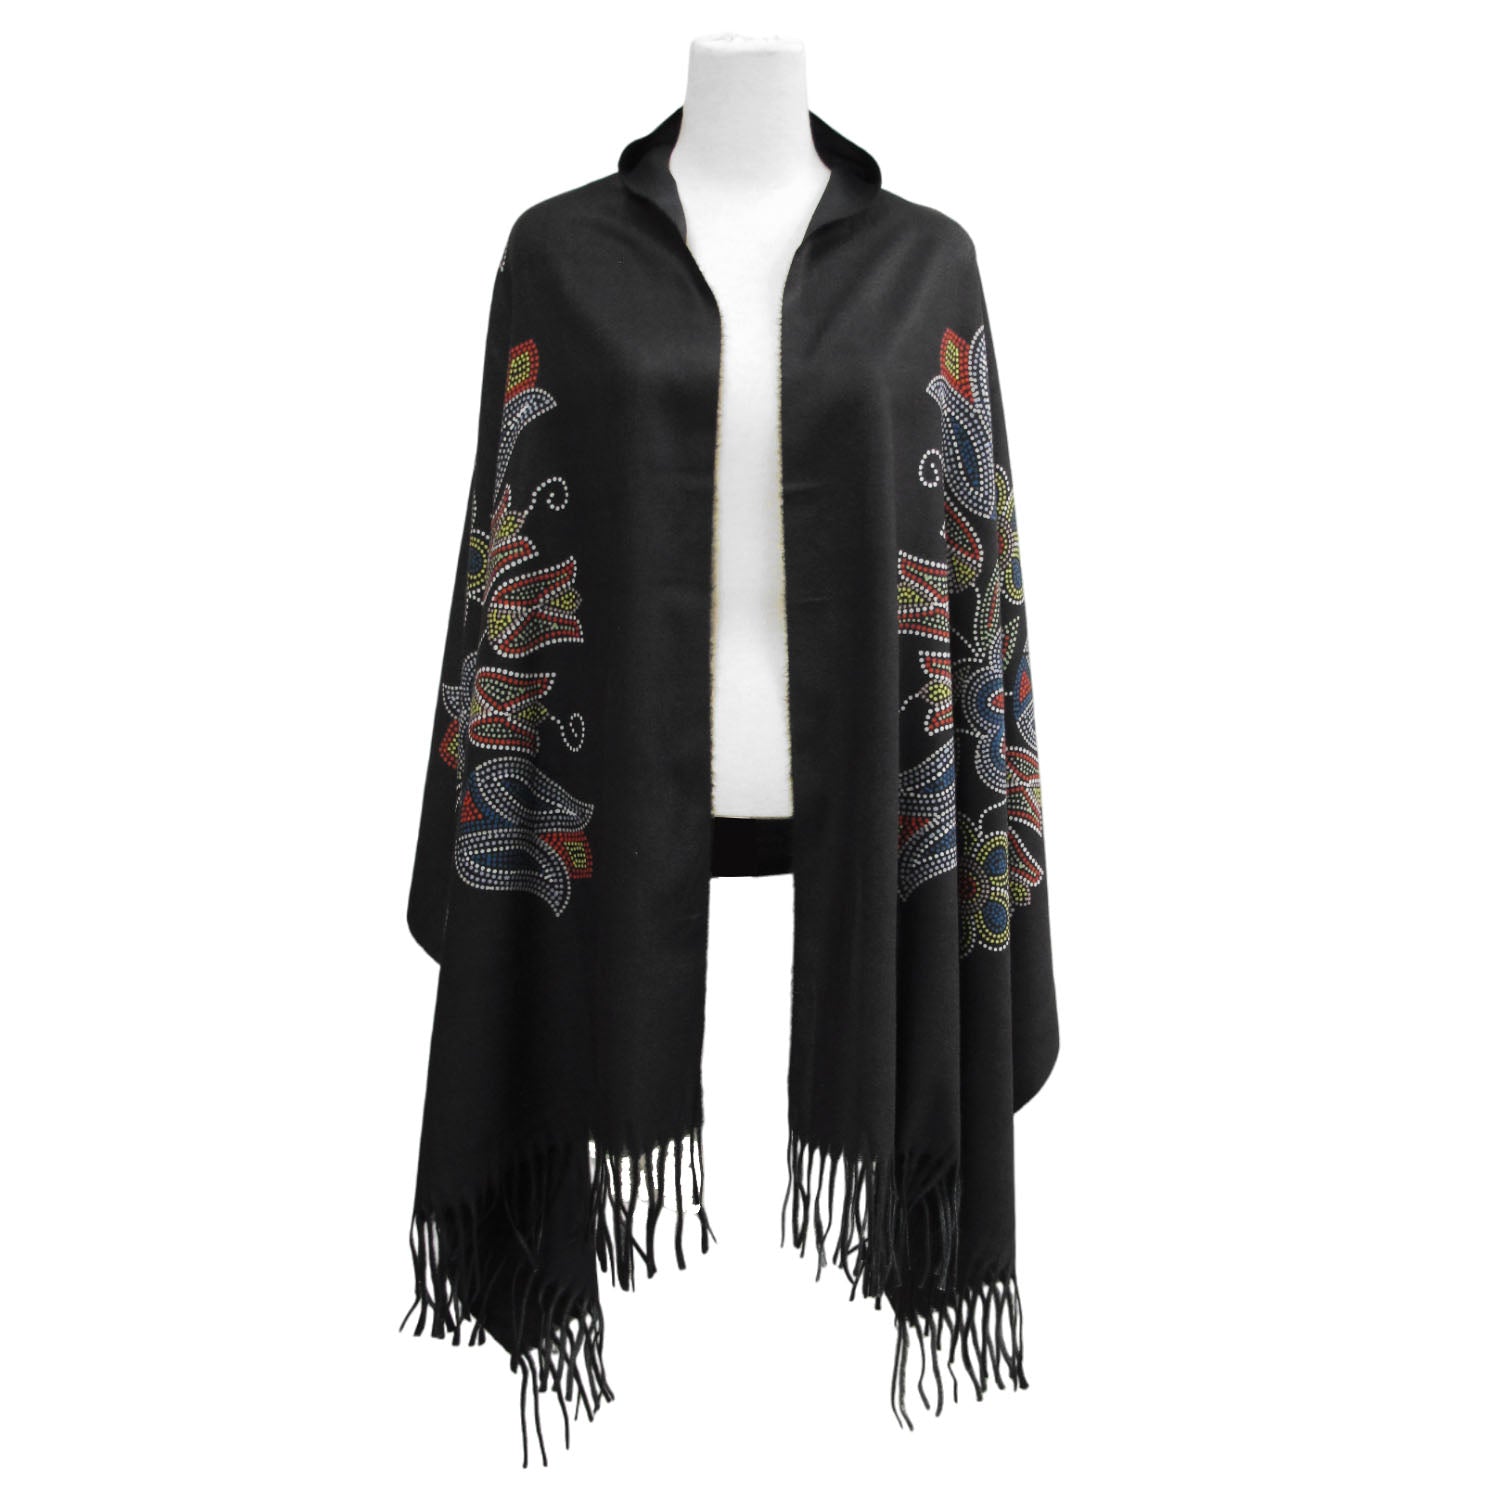 Deb Malcolm Silver Threads Eco-Shawl - Out of Stock